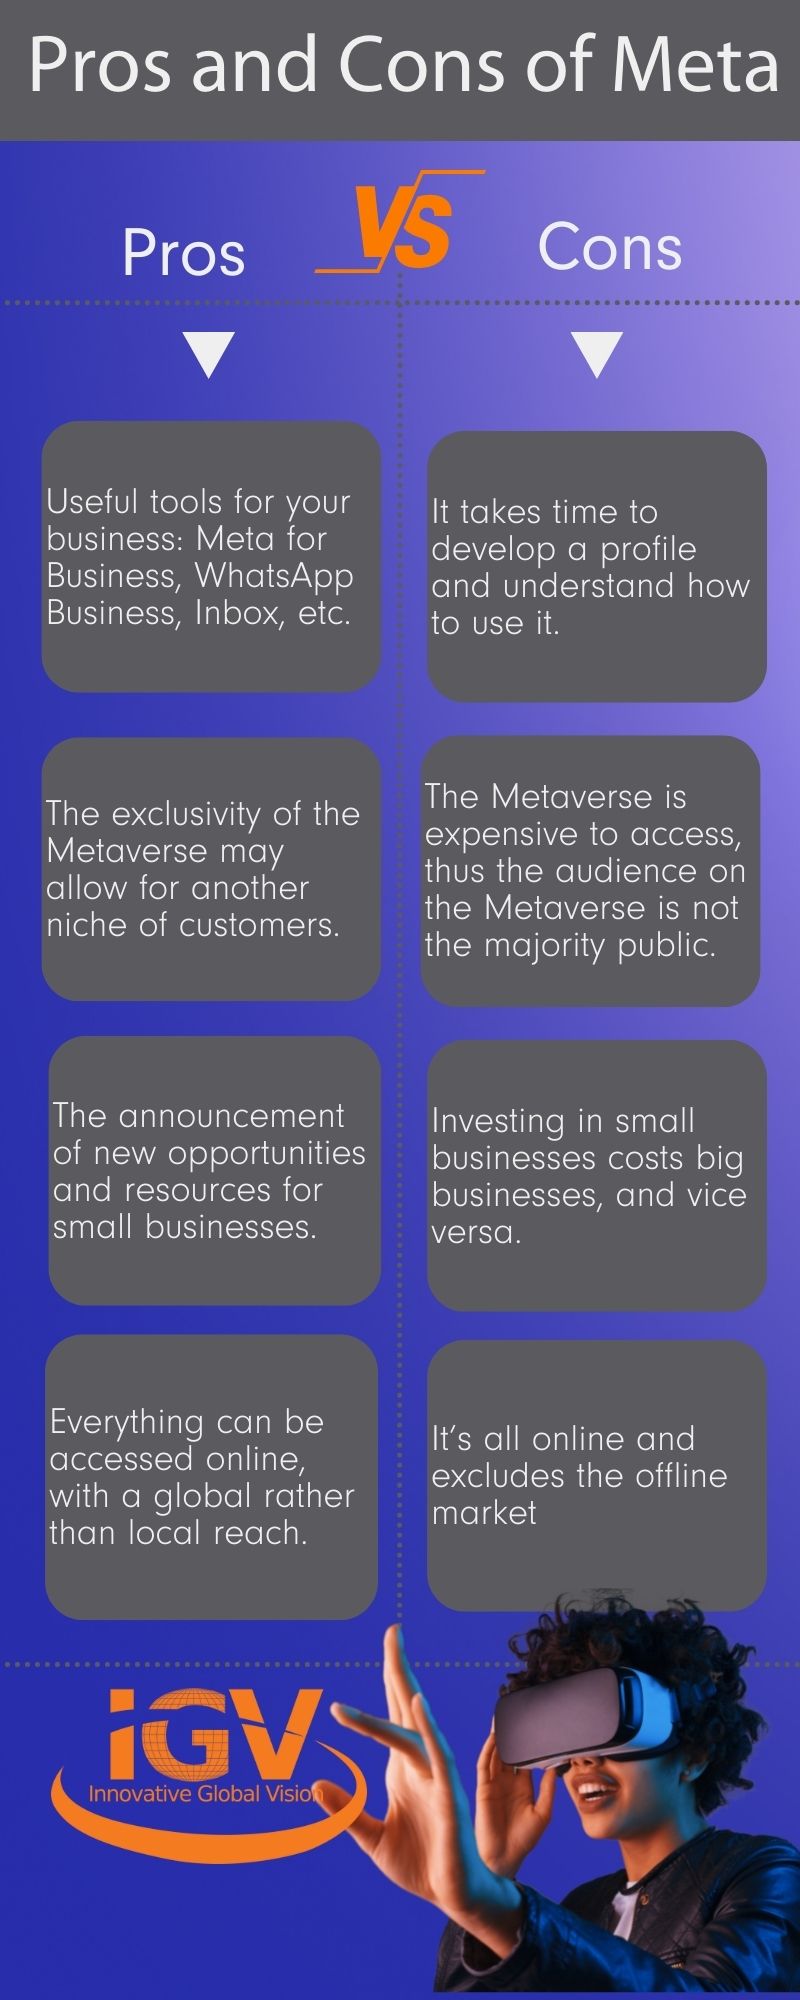 An infographic showing the pros and cons of Meta. 